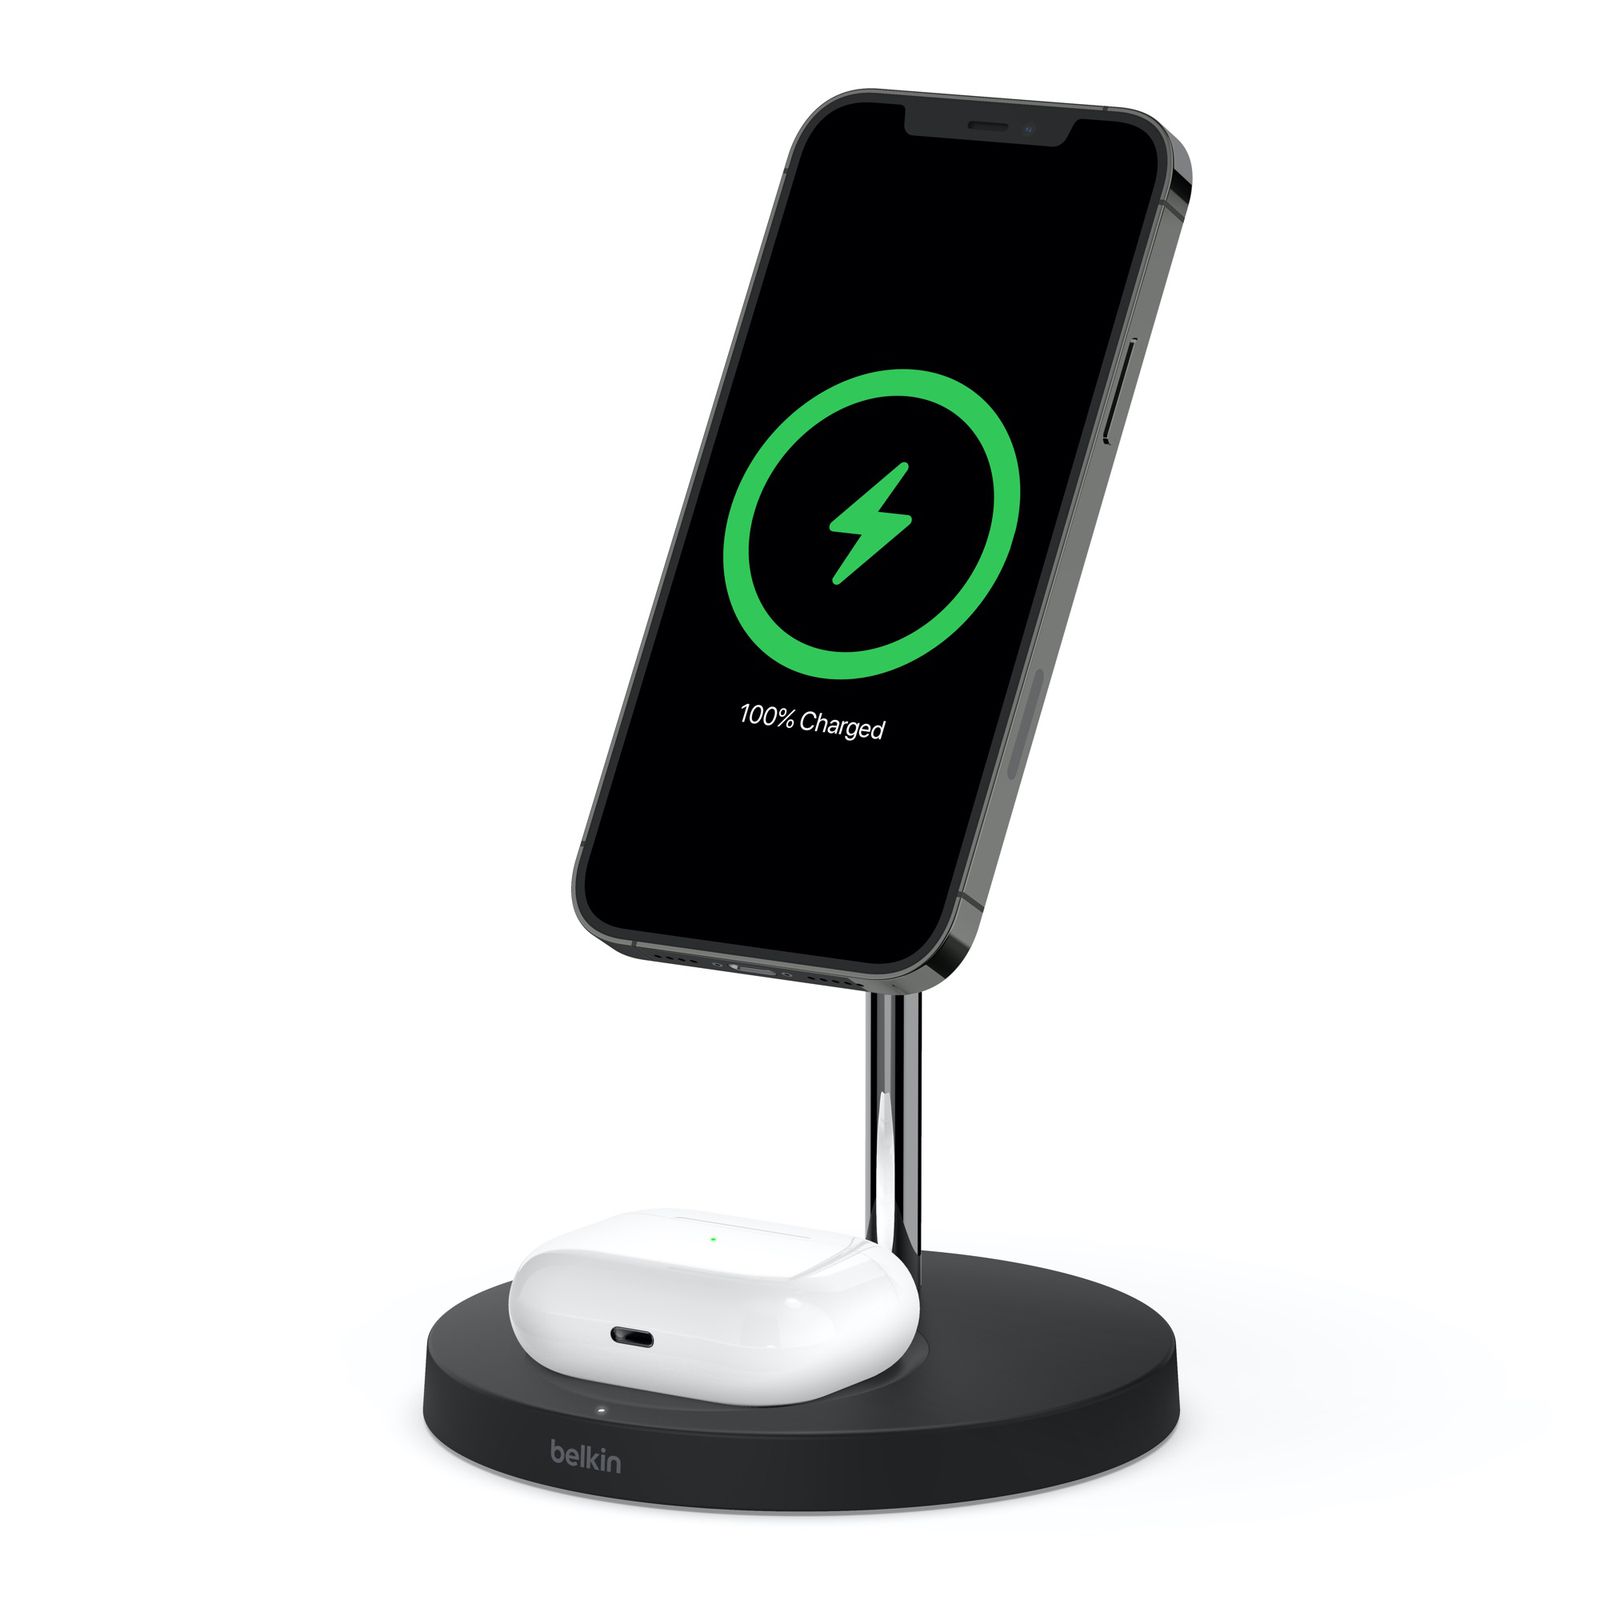  Belkin MagSafe 3-in-1 Wireless Charging Stand (Older